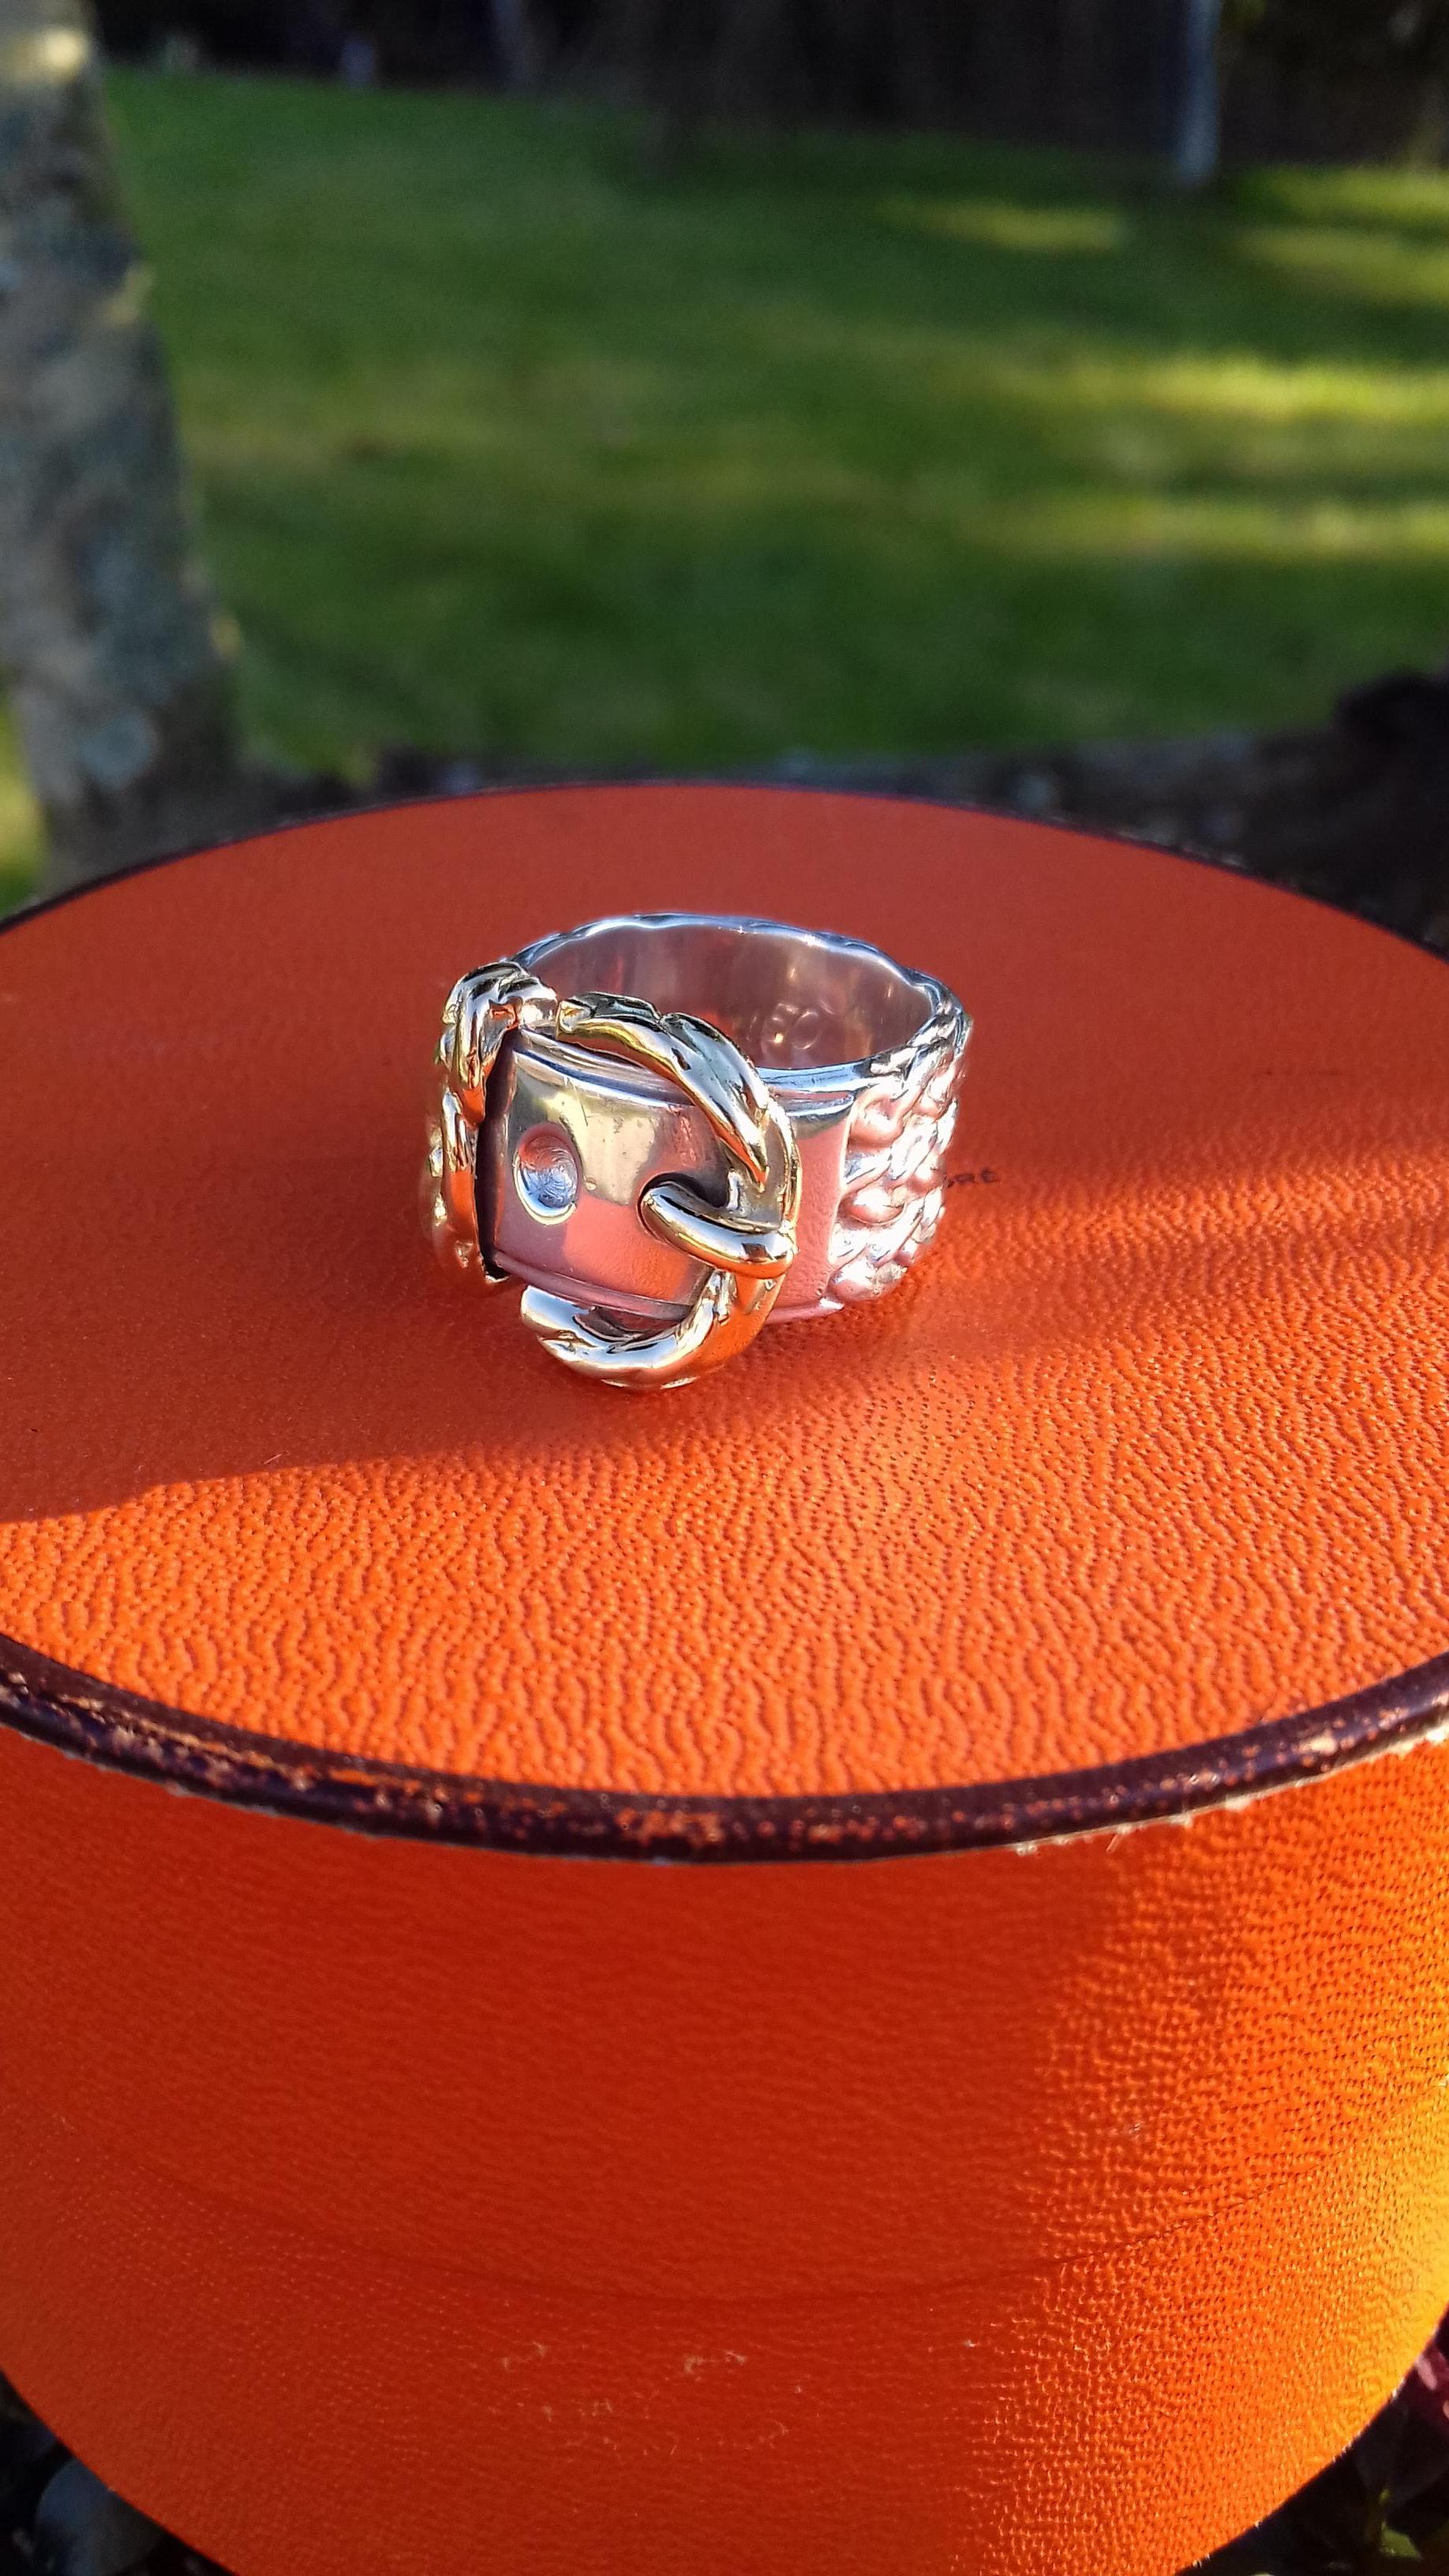 Rare and Beautiful Authentic Hermès Ring

Pattern: the body of the ring is braided silver, featuring a belt buckle on the front

Can be used as scarf ring as well 

Made of Silver and Gold

Colorways: silvered and golden

